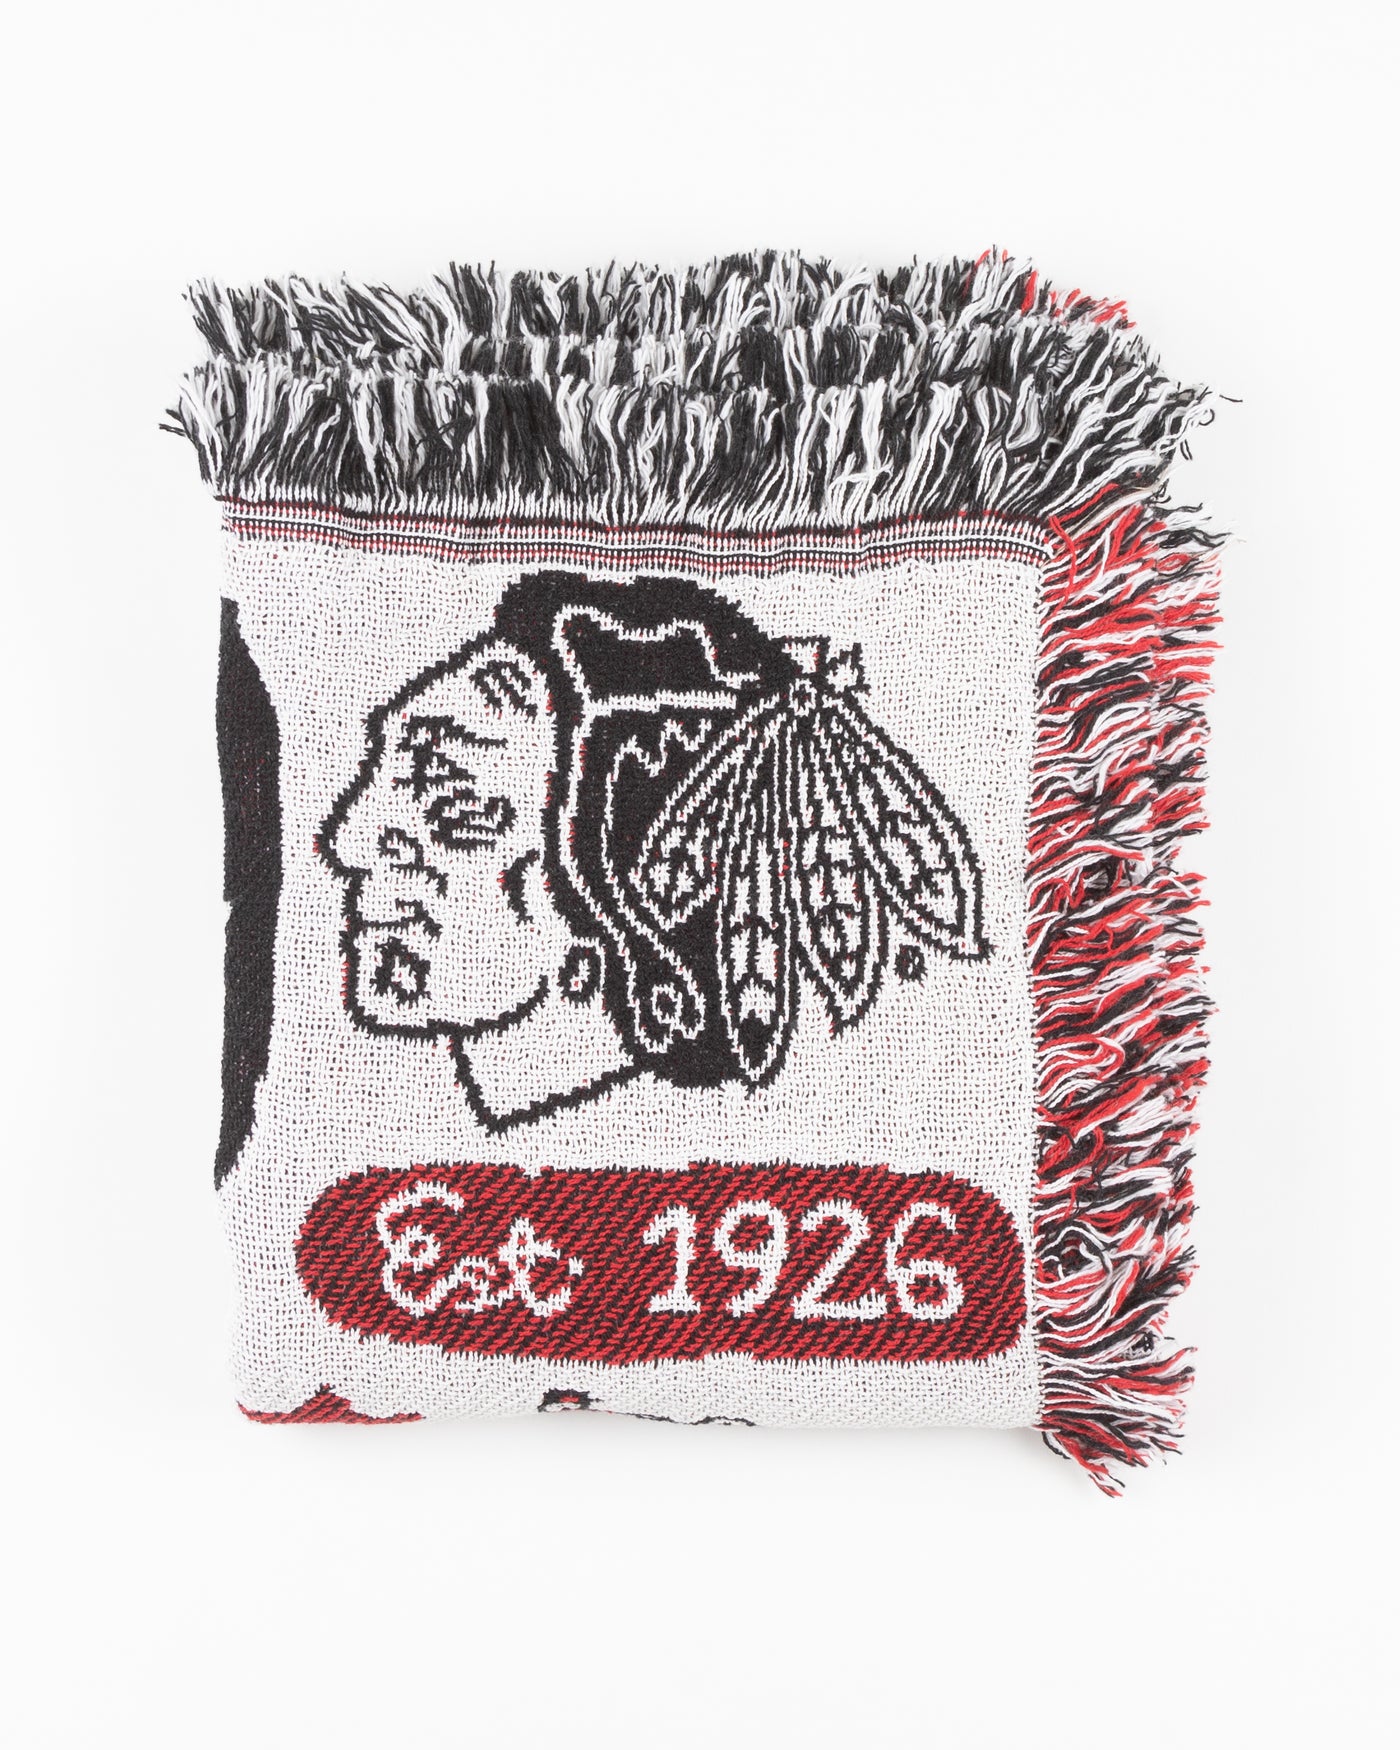 Julia Gash blanket with Chicago and Chicago Blackhawks inspired all over design - front lay flat